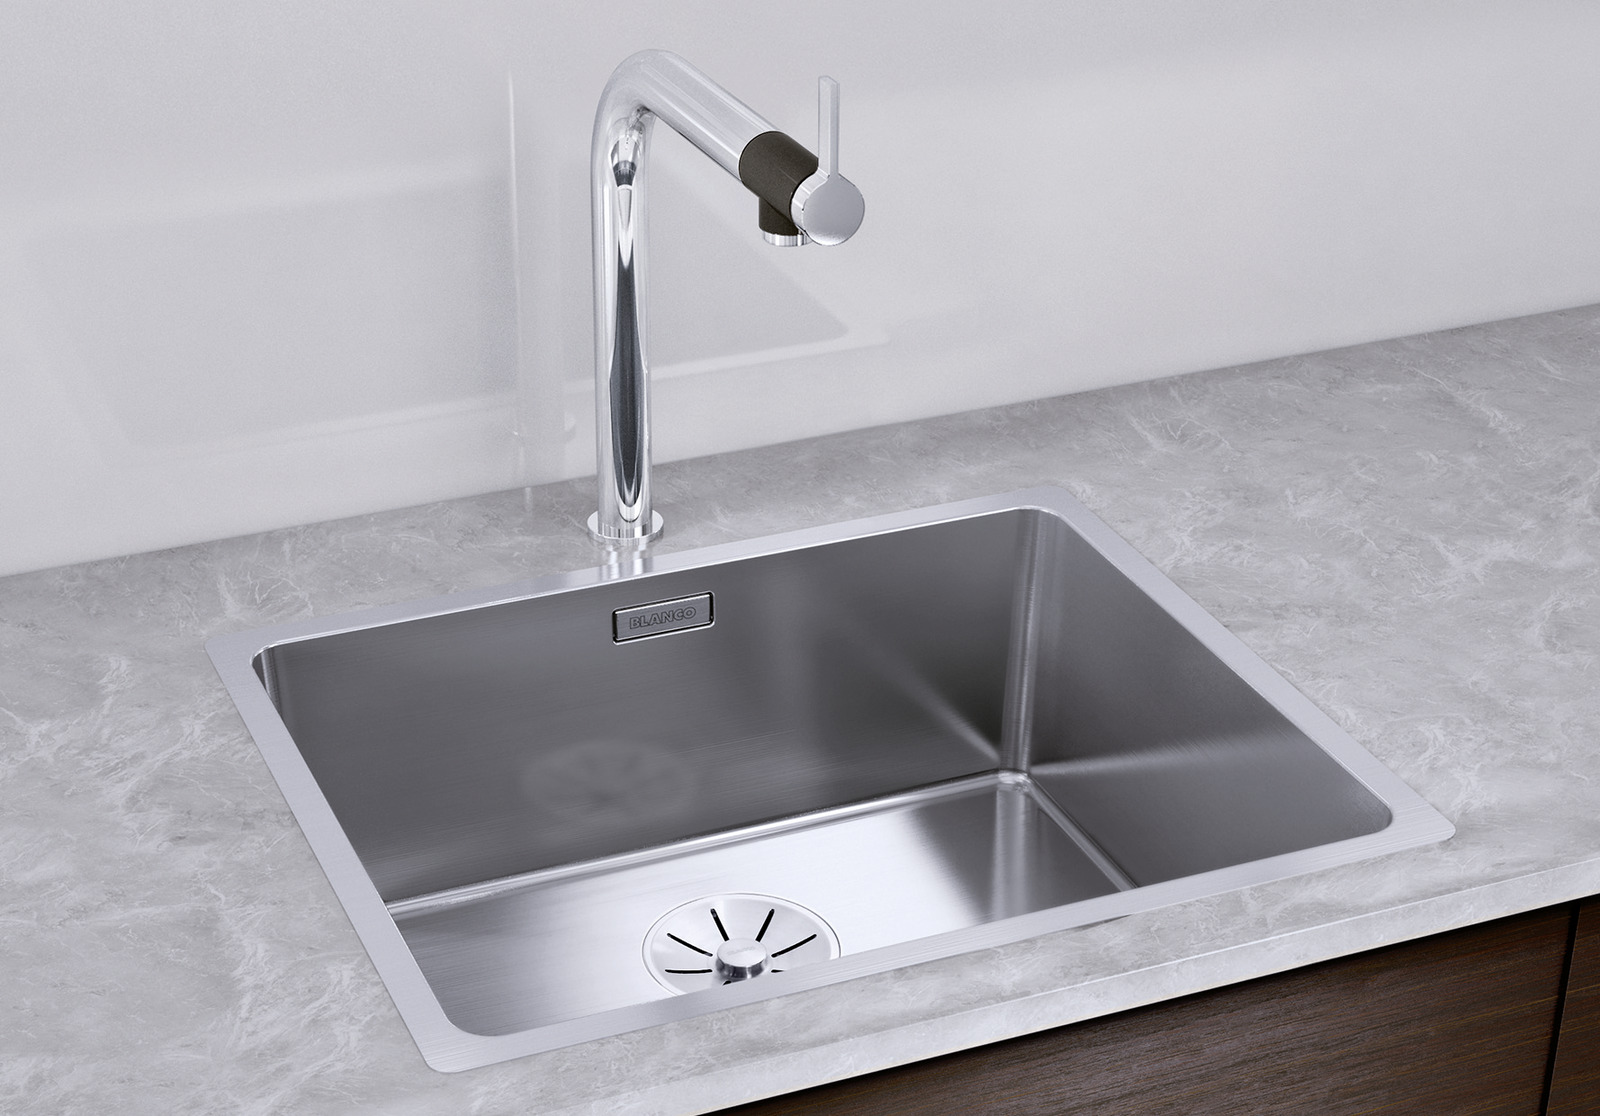 Blanco Andano 500-if sink 522965 54x44cm, Stainless Steel silk g